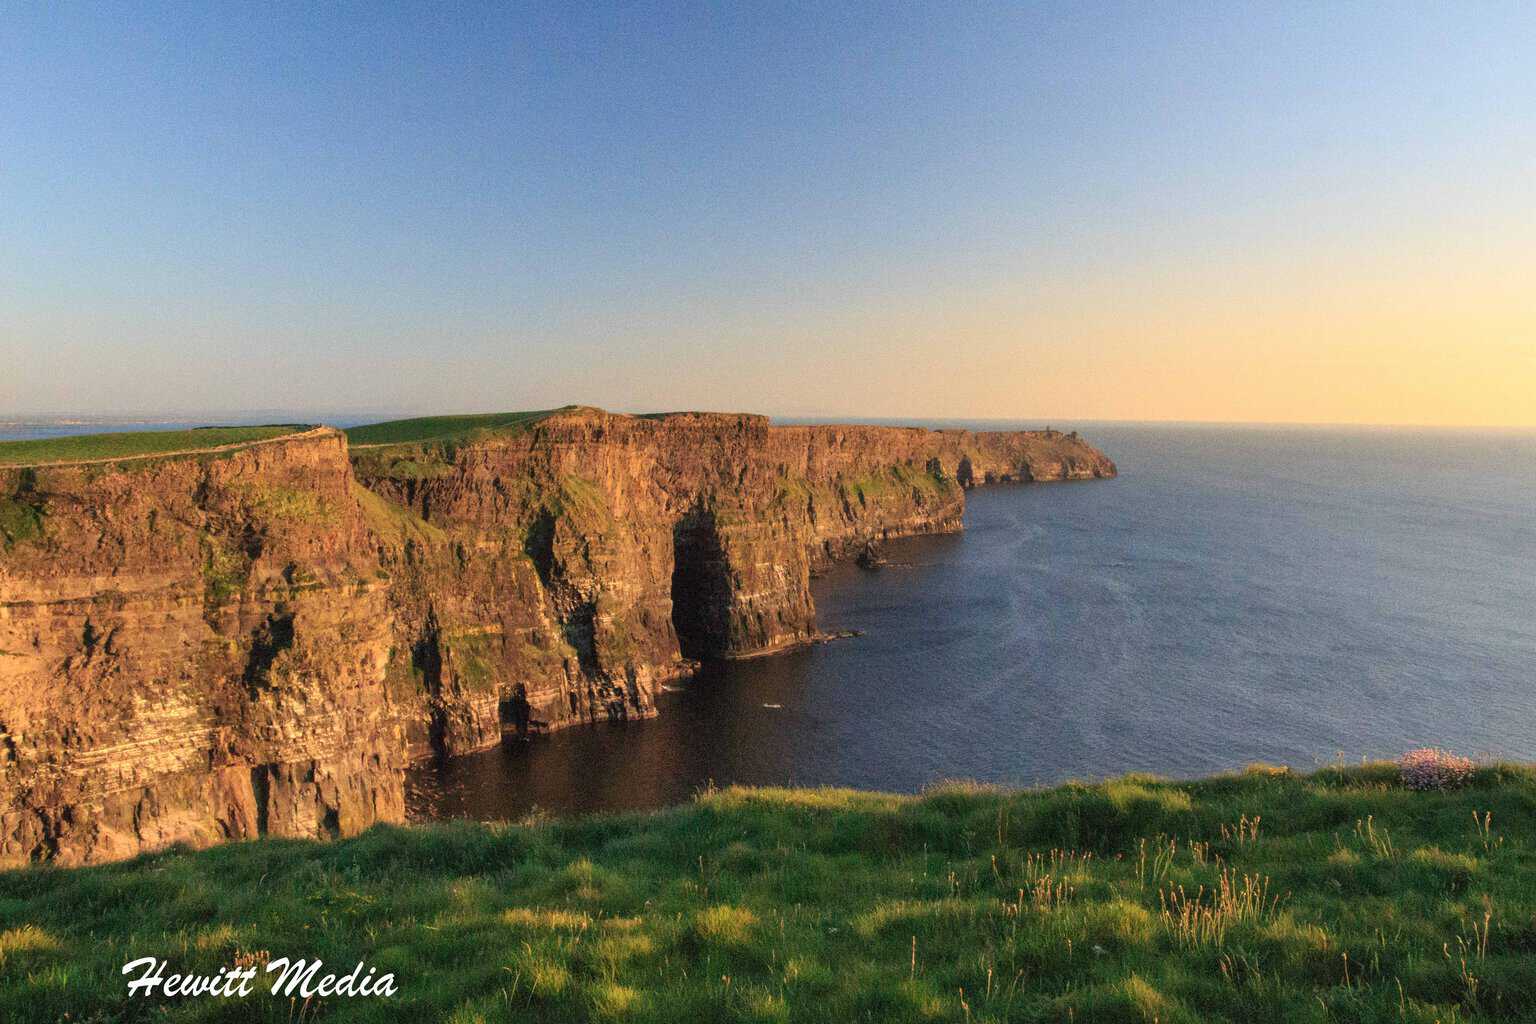 The Cliffs of Moher Visitor’s Guide